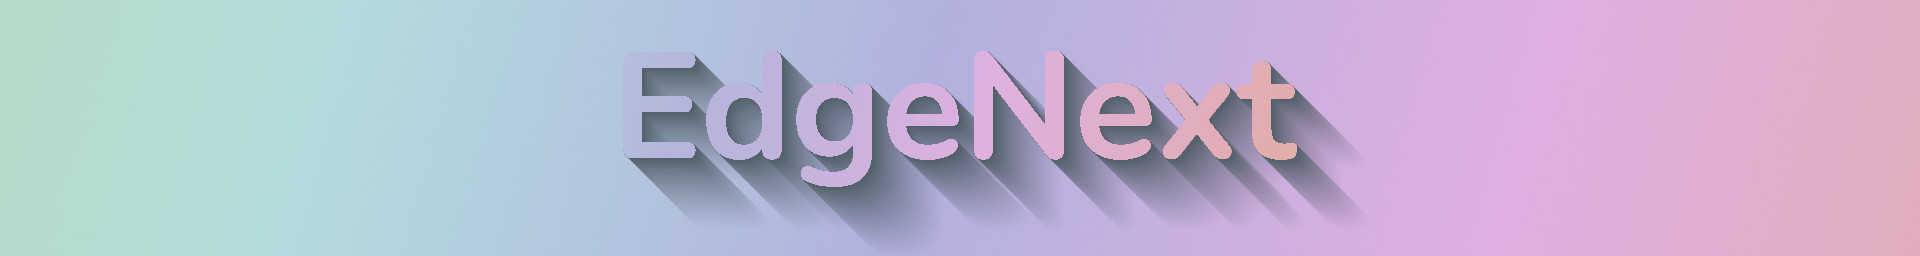 Simple blue header with NextEdge :) written on it and a disclaimer